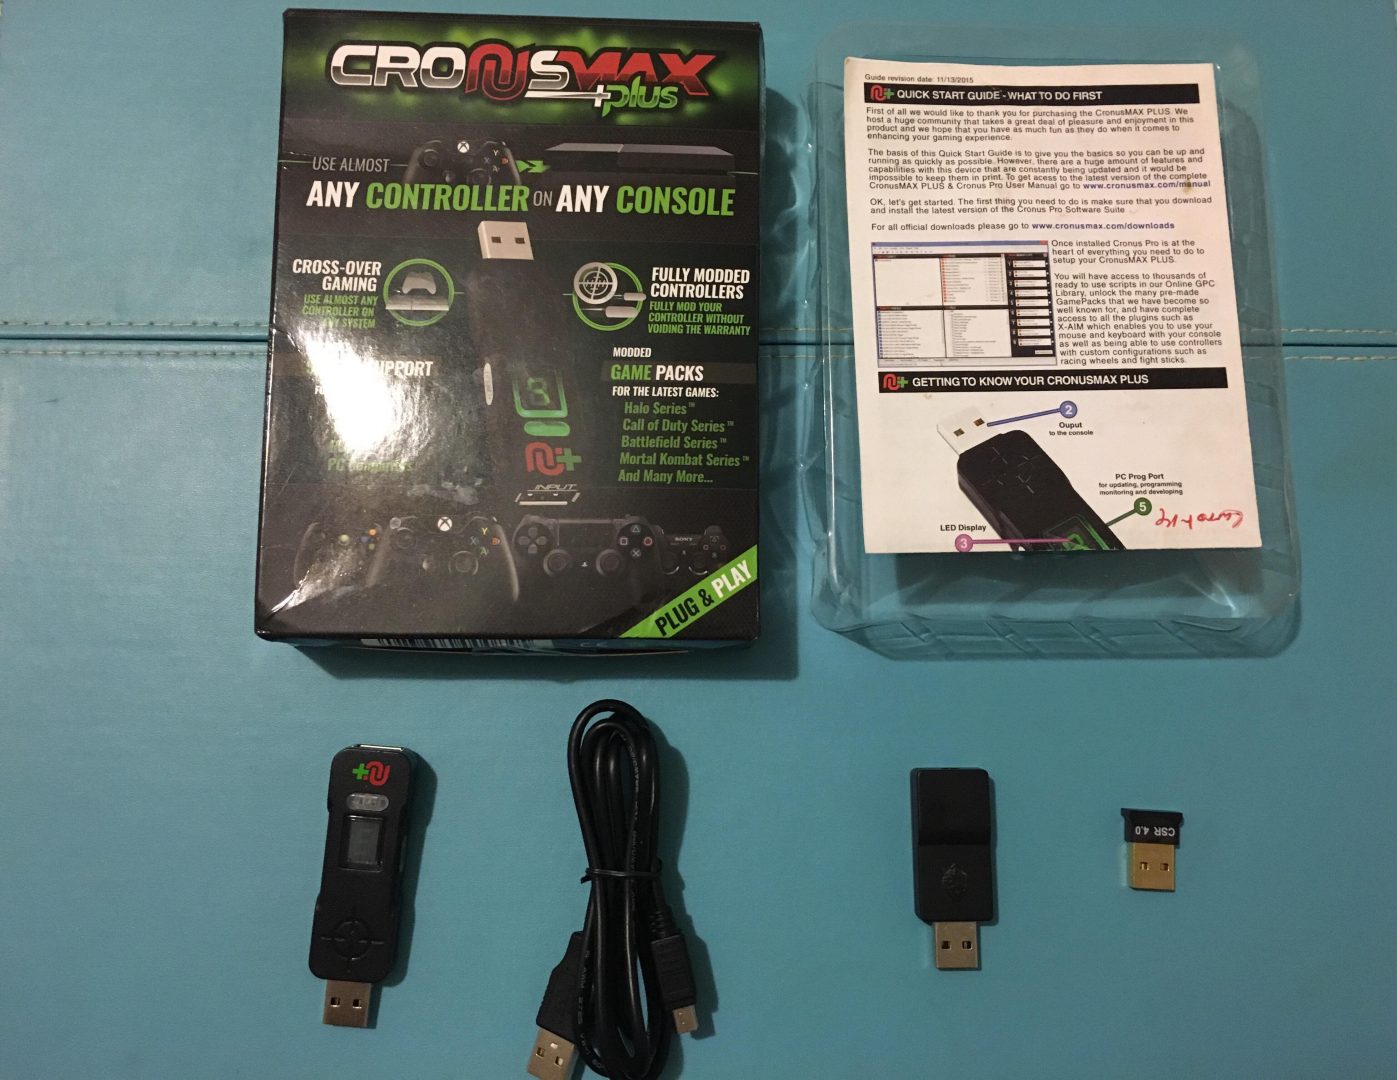 CronusMAX PLUS: Reviews, Features, Pricing & Download